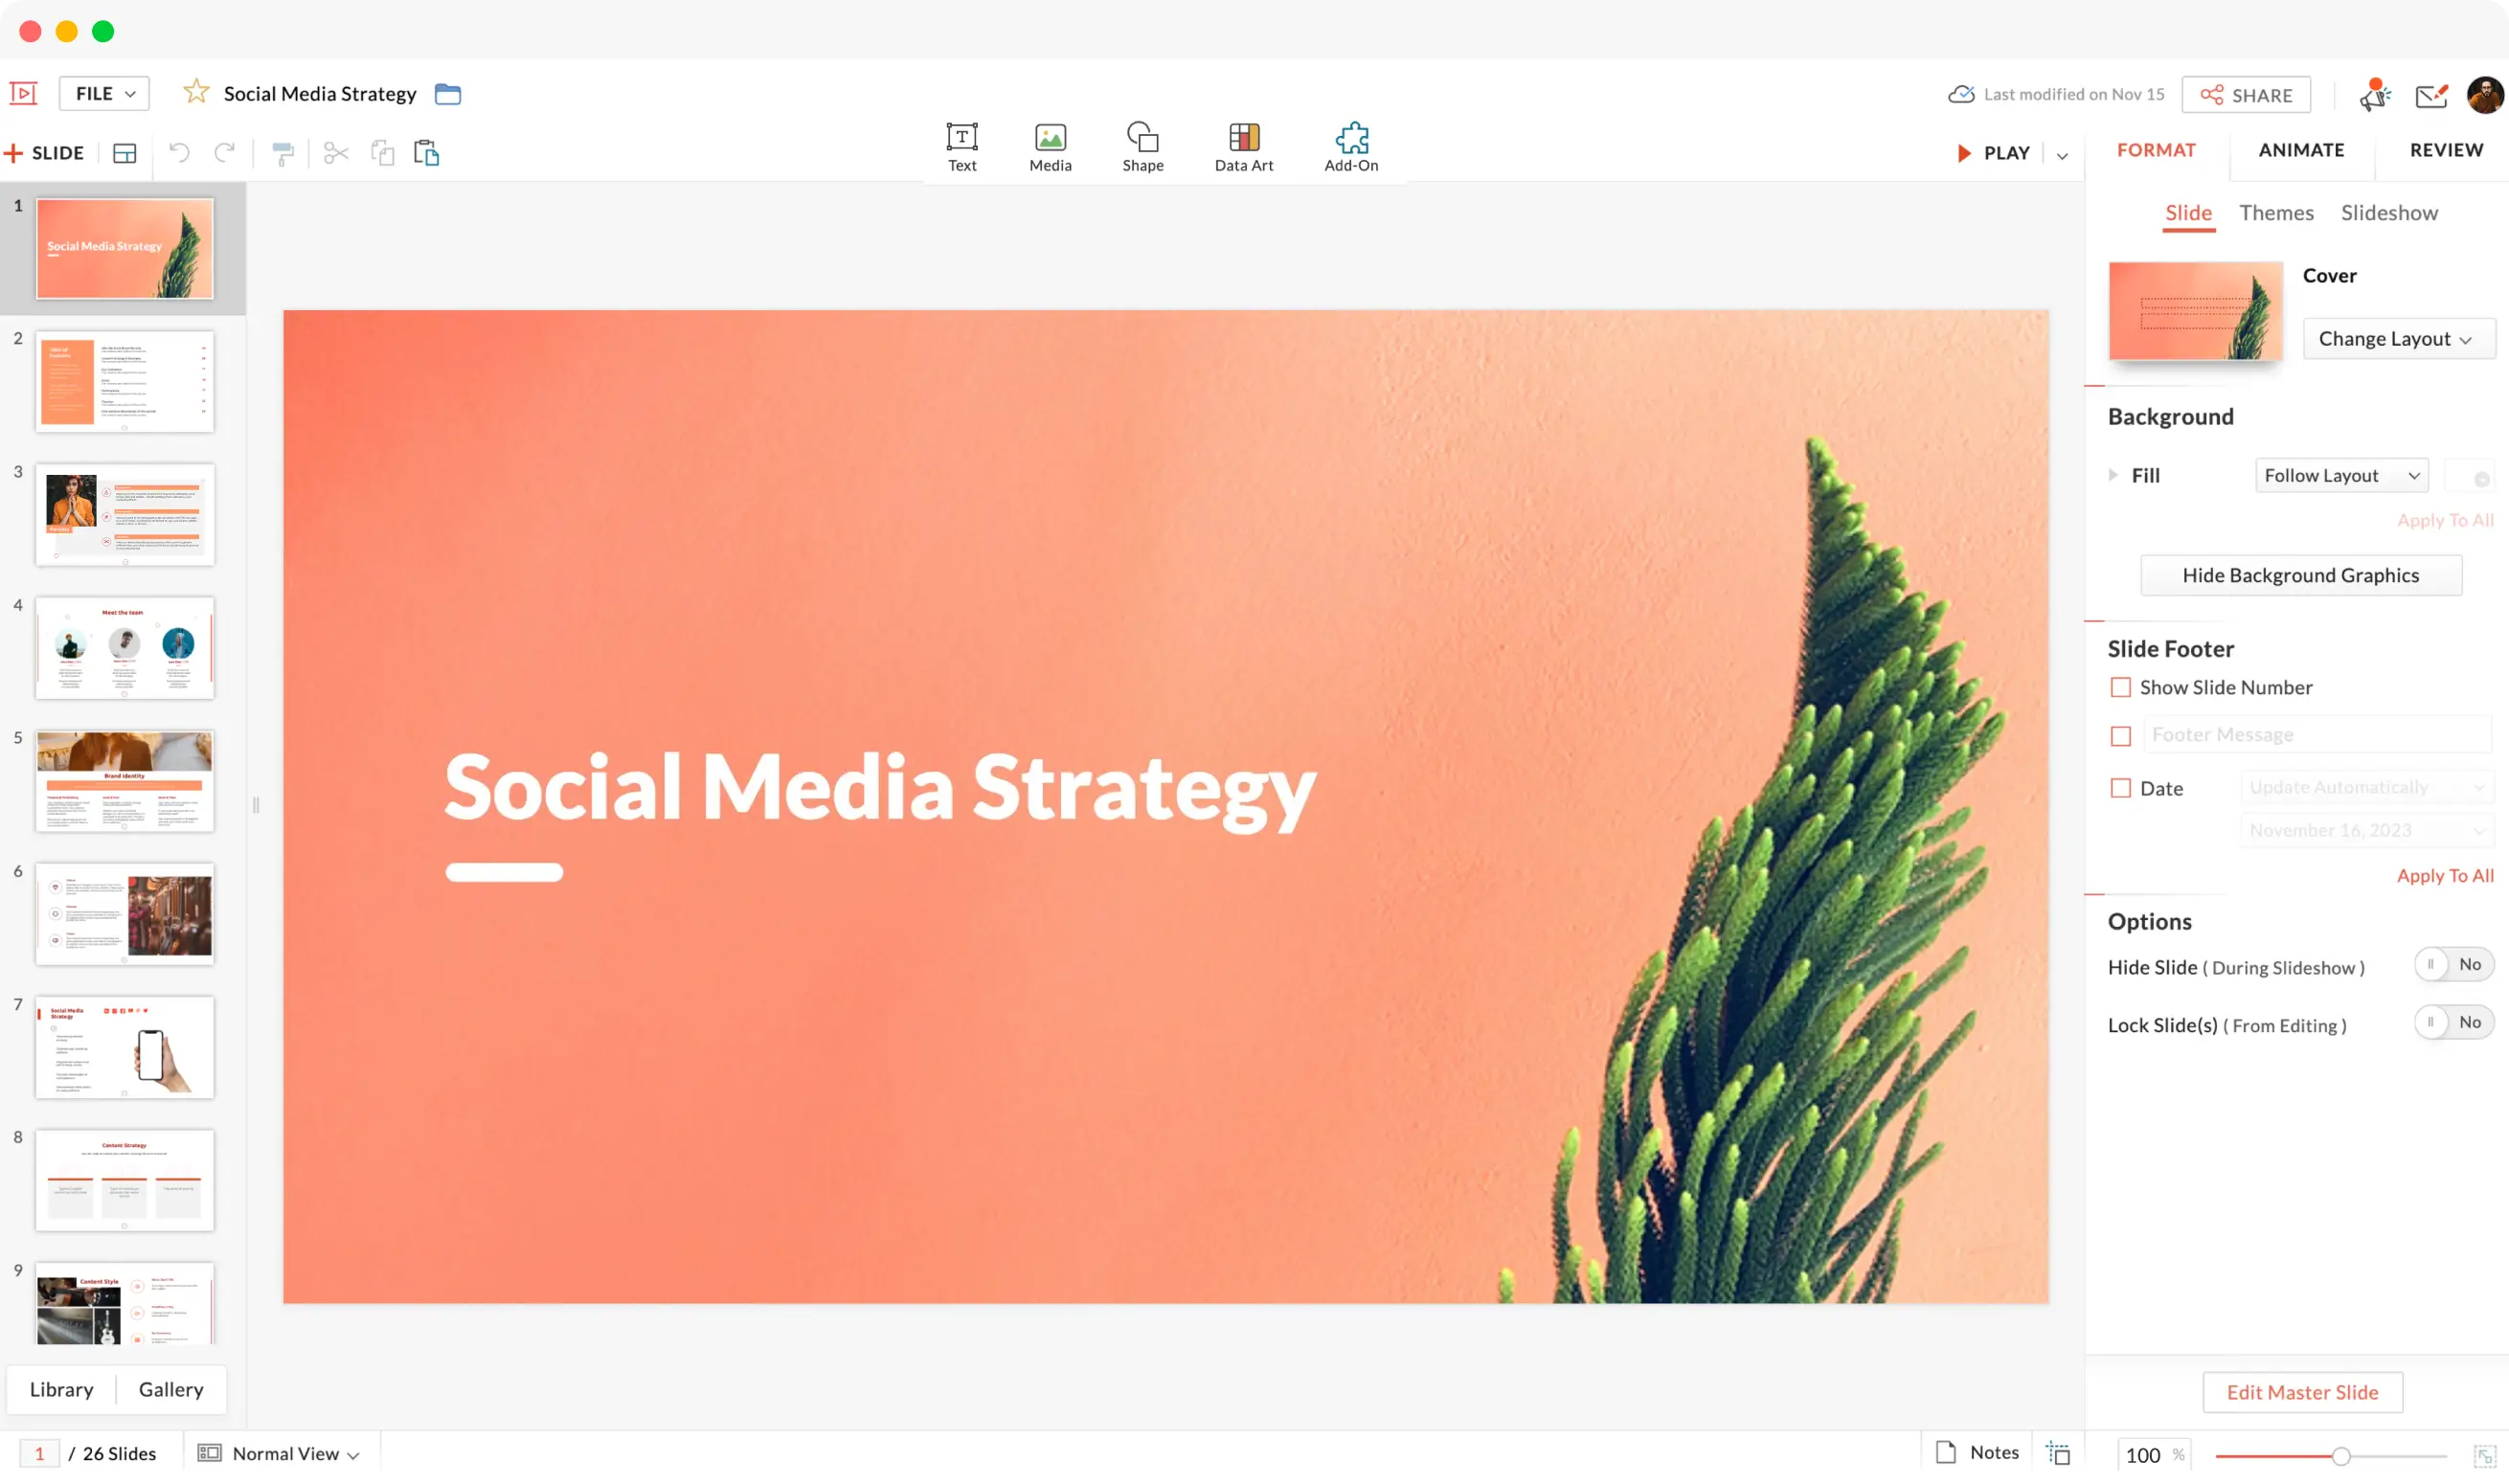 Social media strategy template by Zoho Show